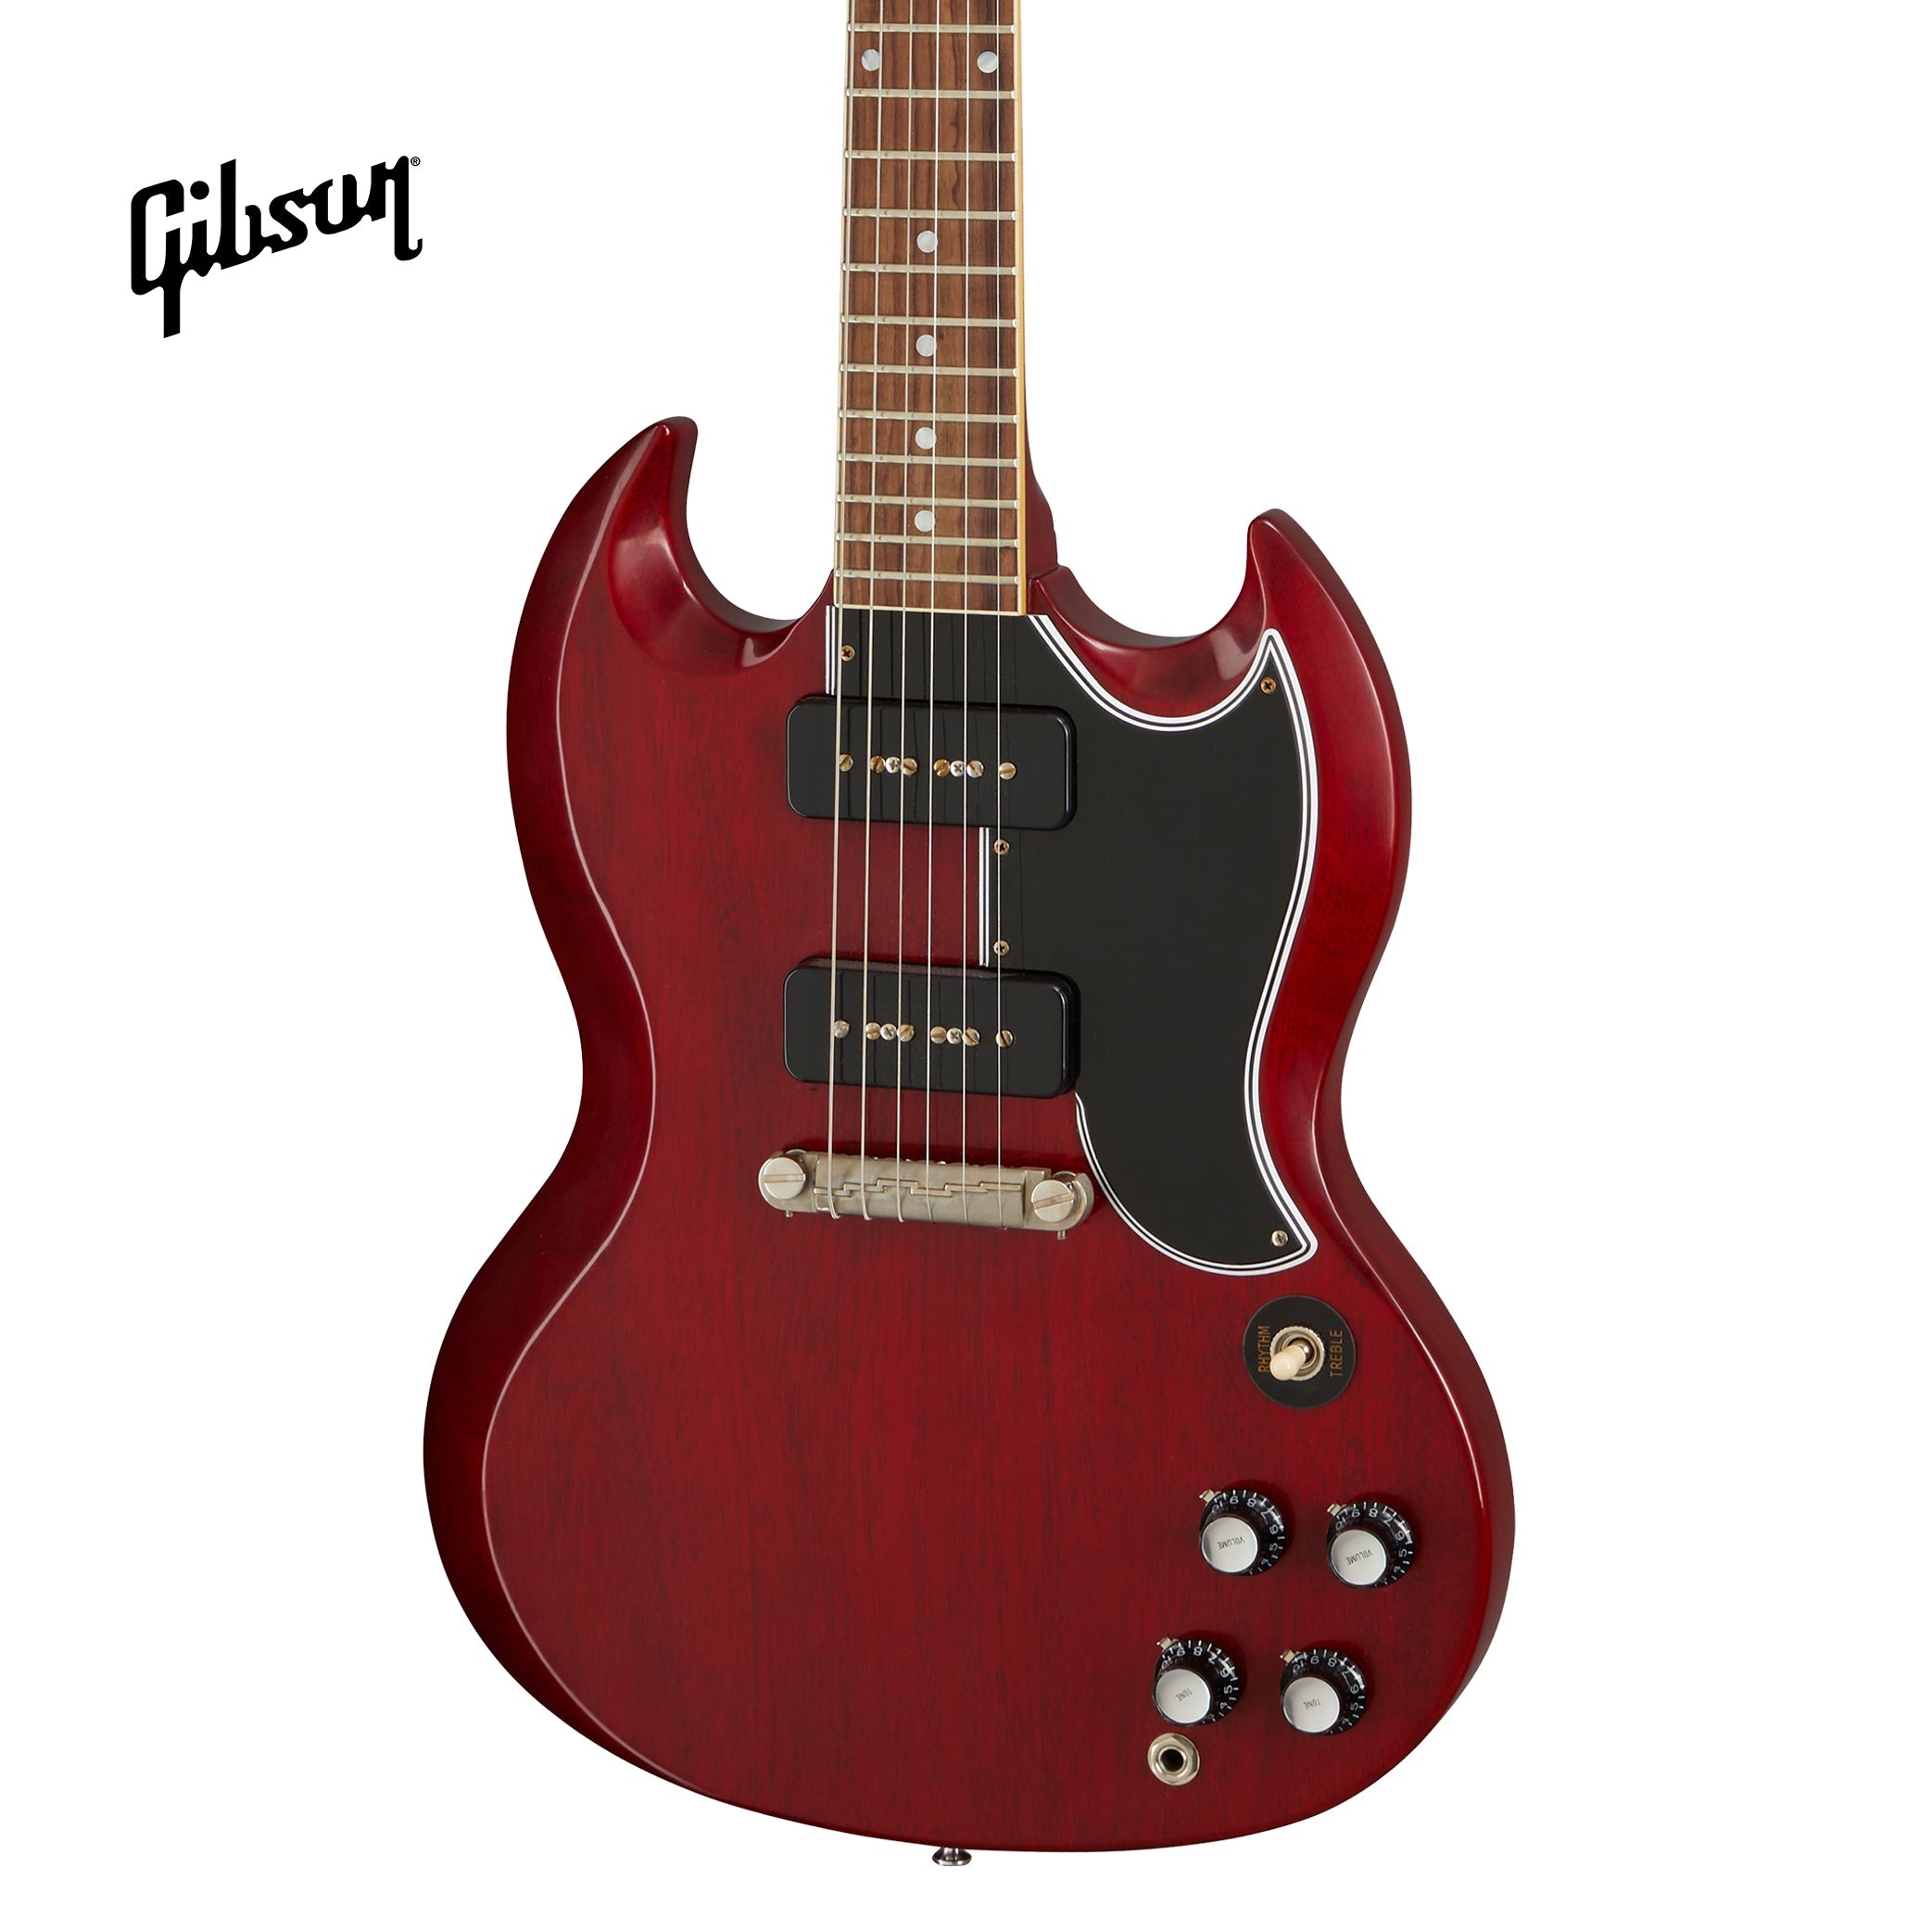 GIBSON 1963 SG SPECIAL REISSUE LIGHTNING BAR VOS ELECTRIC GUITAR - CHERRY RED